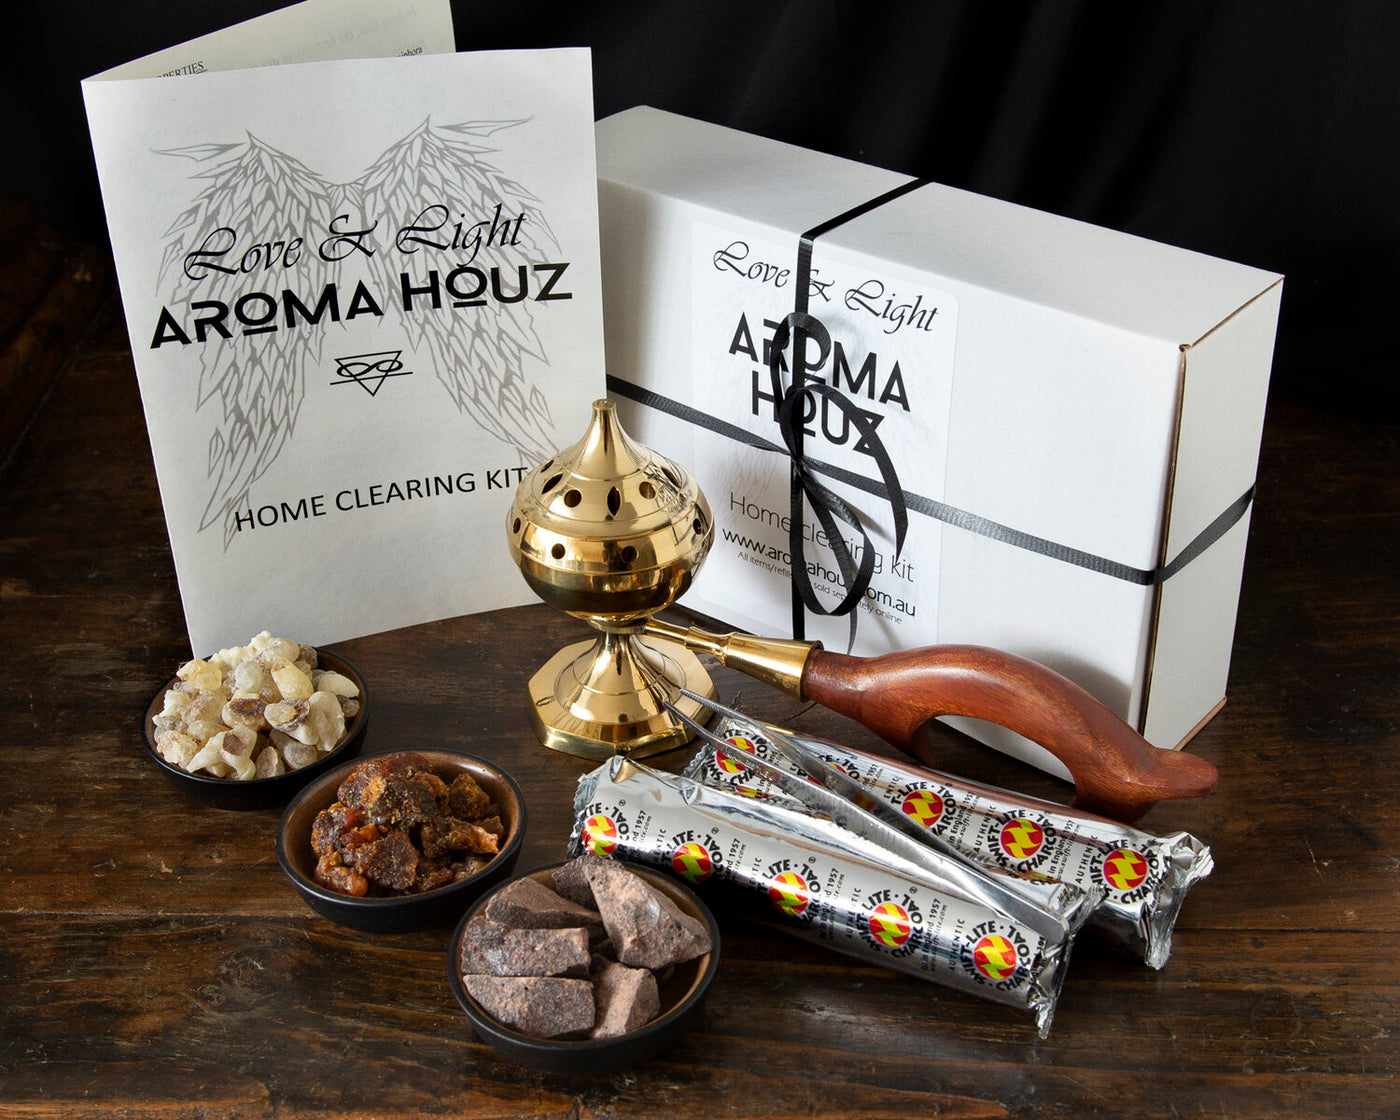 Best Selling Products - Aroma Houz